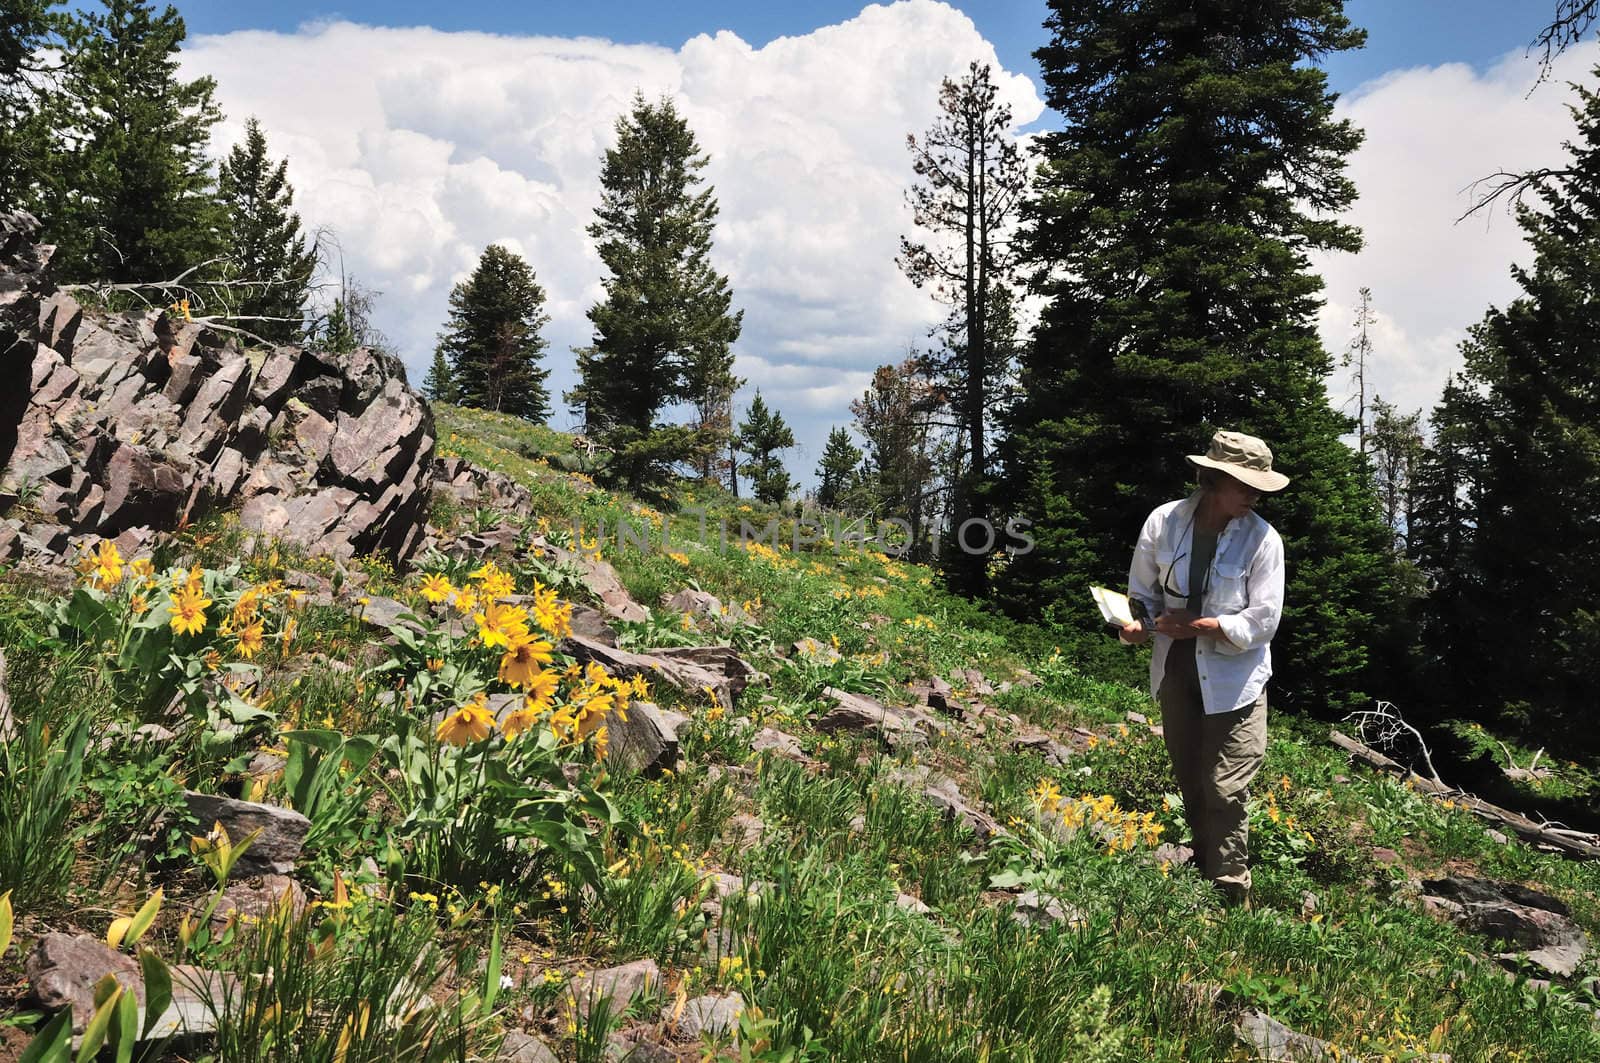 An active senior female hiker explores the mountains, looking for wildflowers.